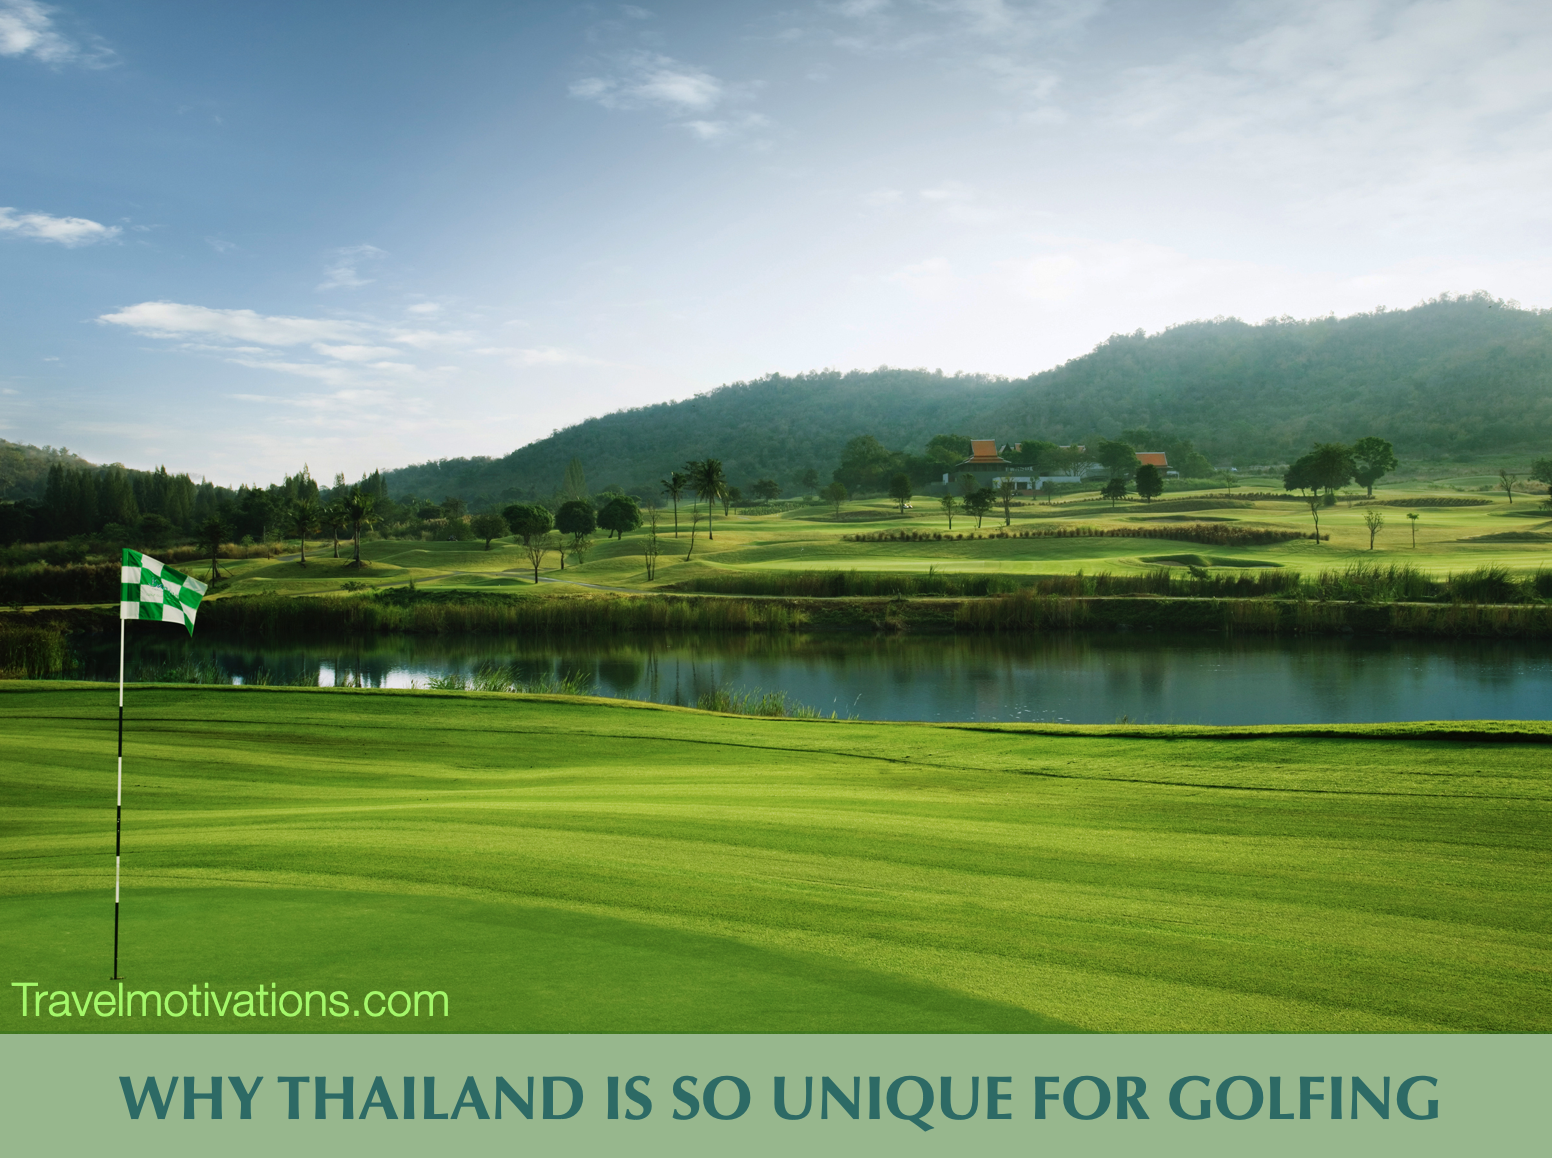 Why Thailand is unique for golfing